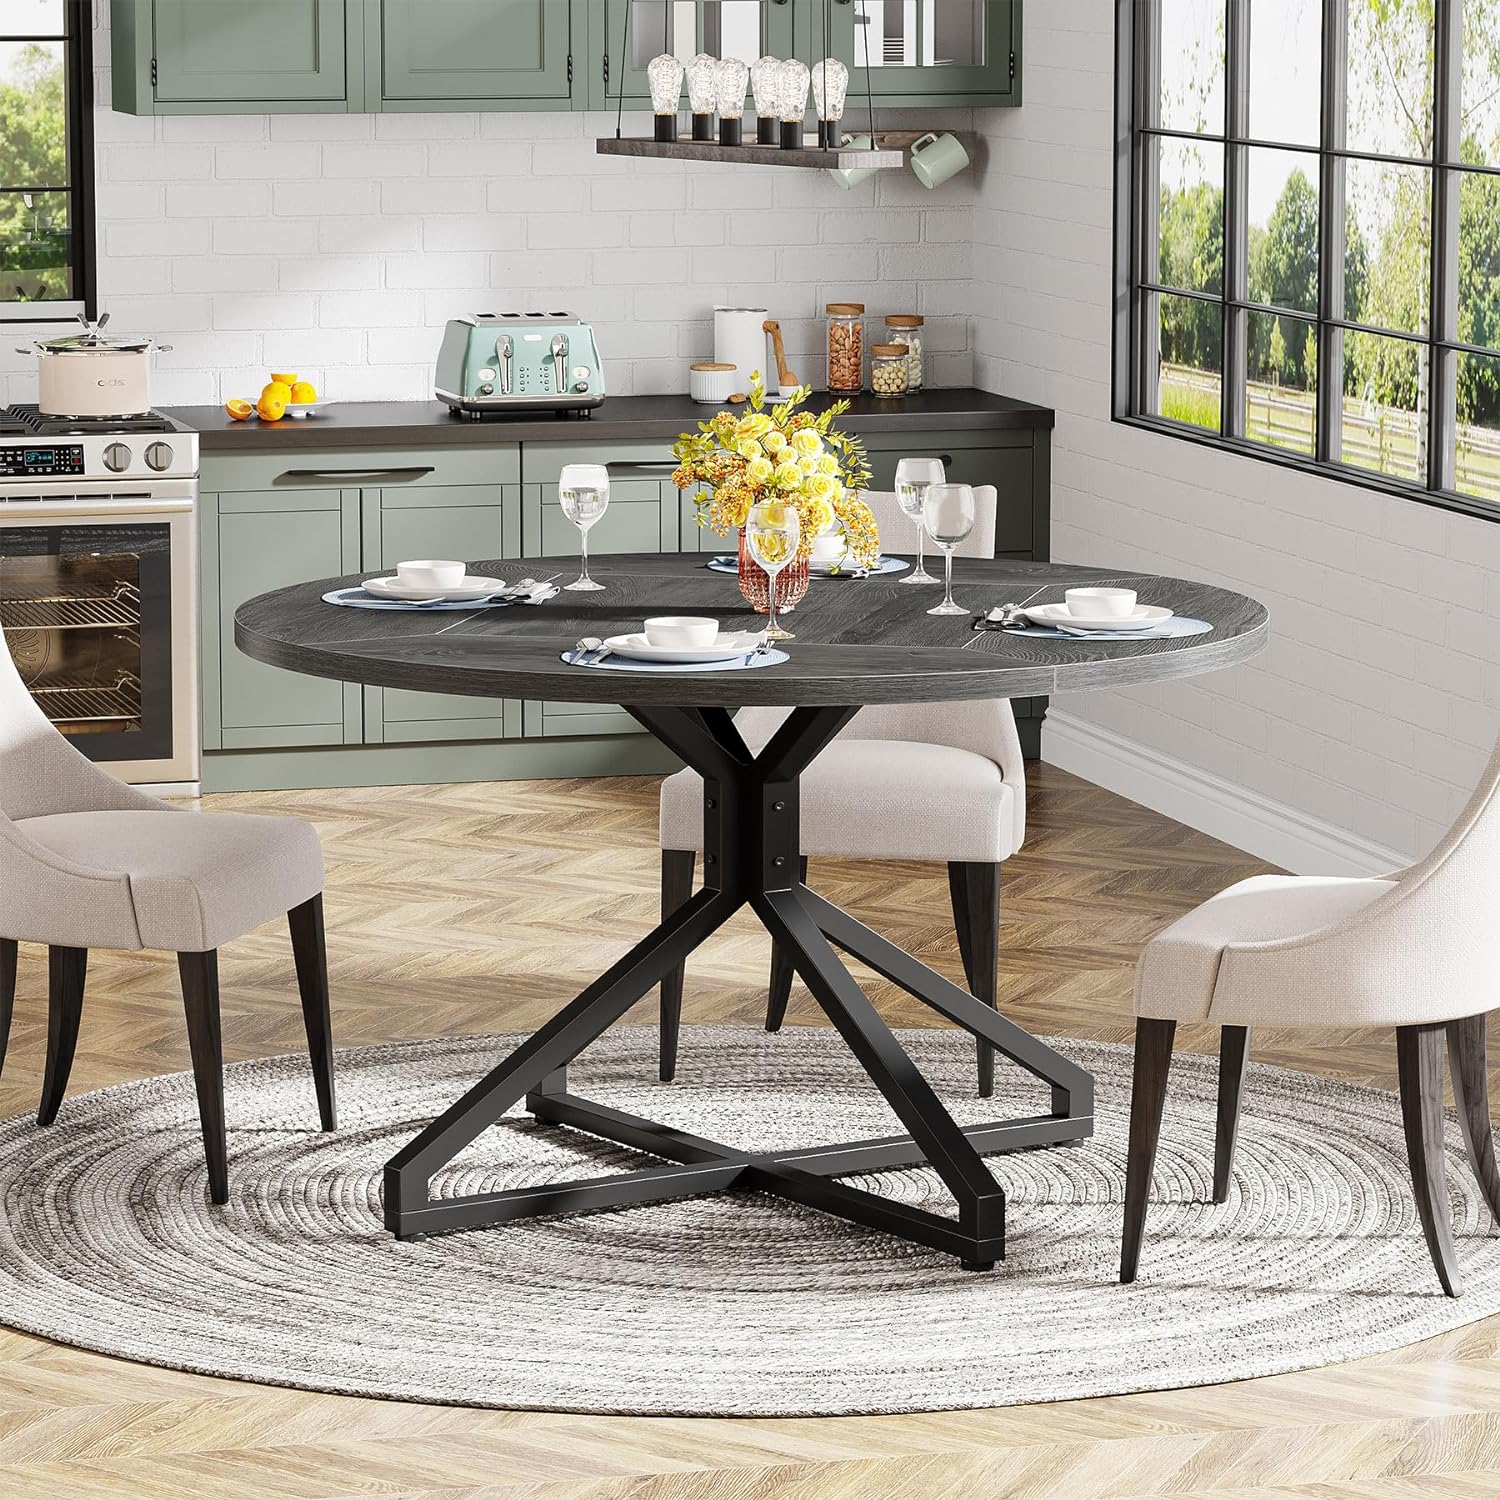 Round Dining Table for 4-6 People, 47-Inch Circle Kitchen Table Dining Room